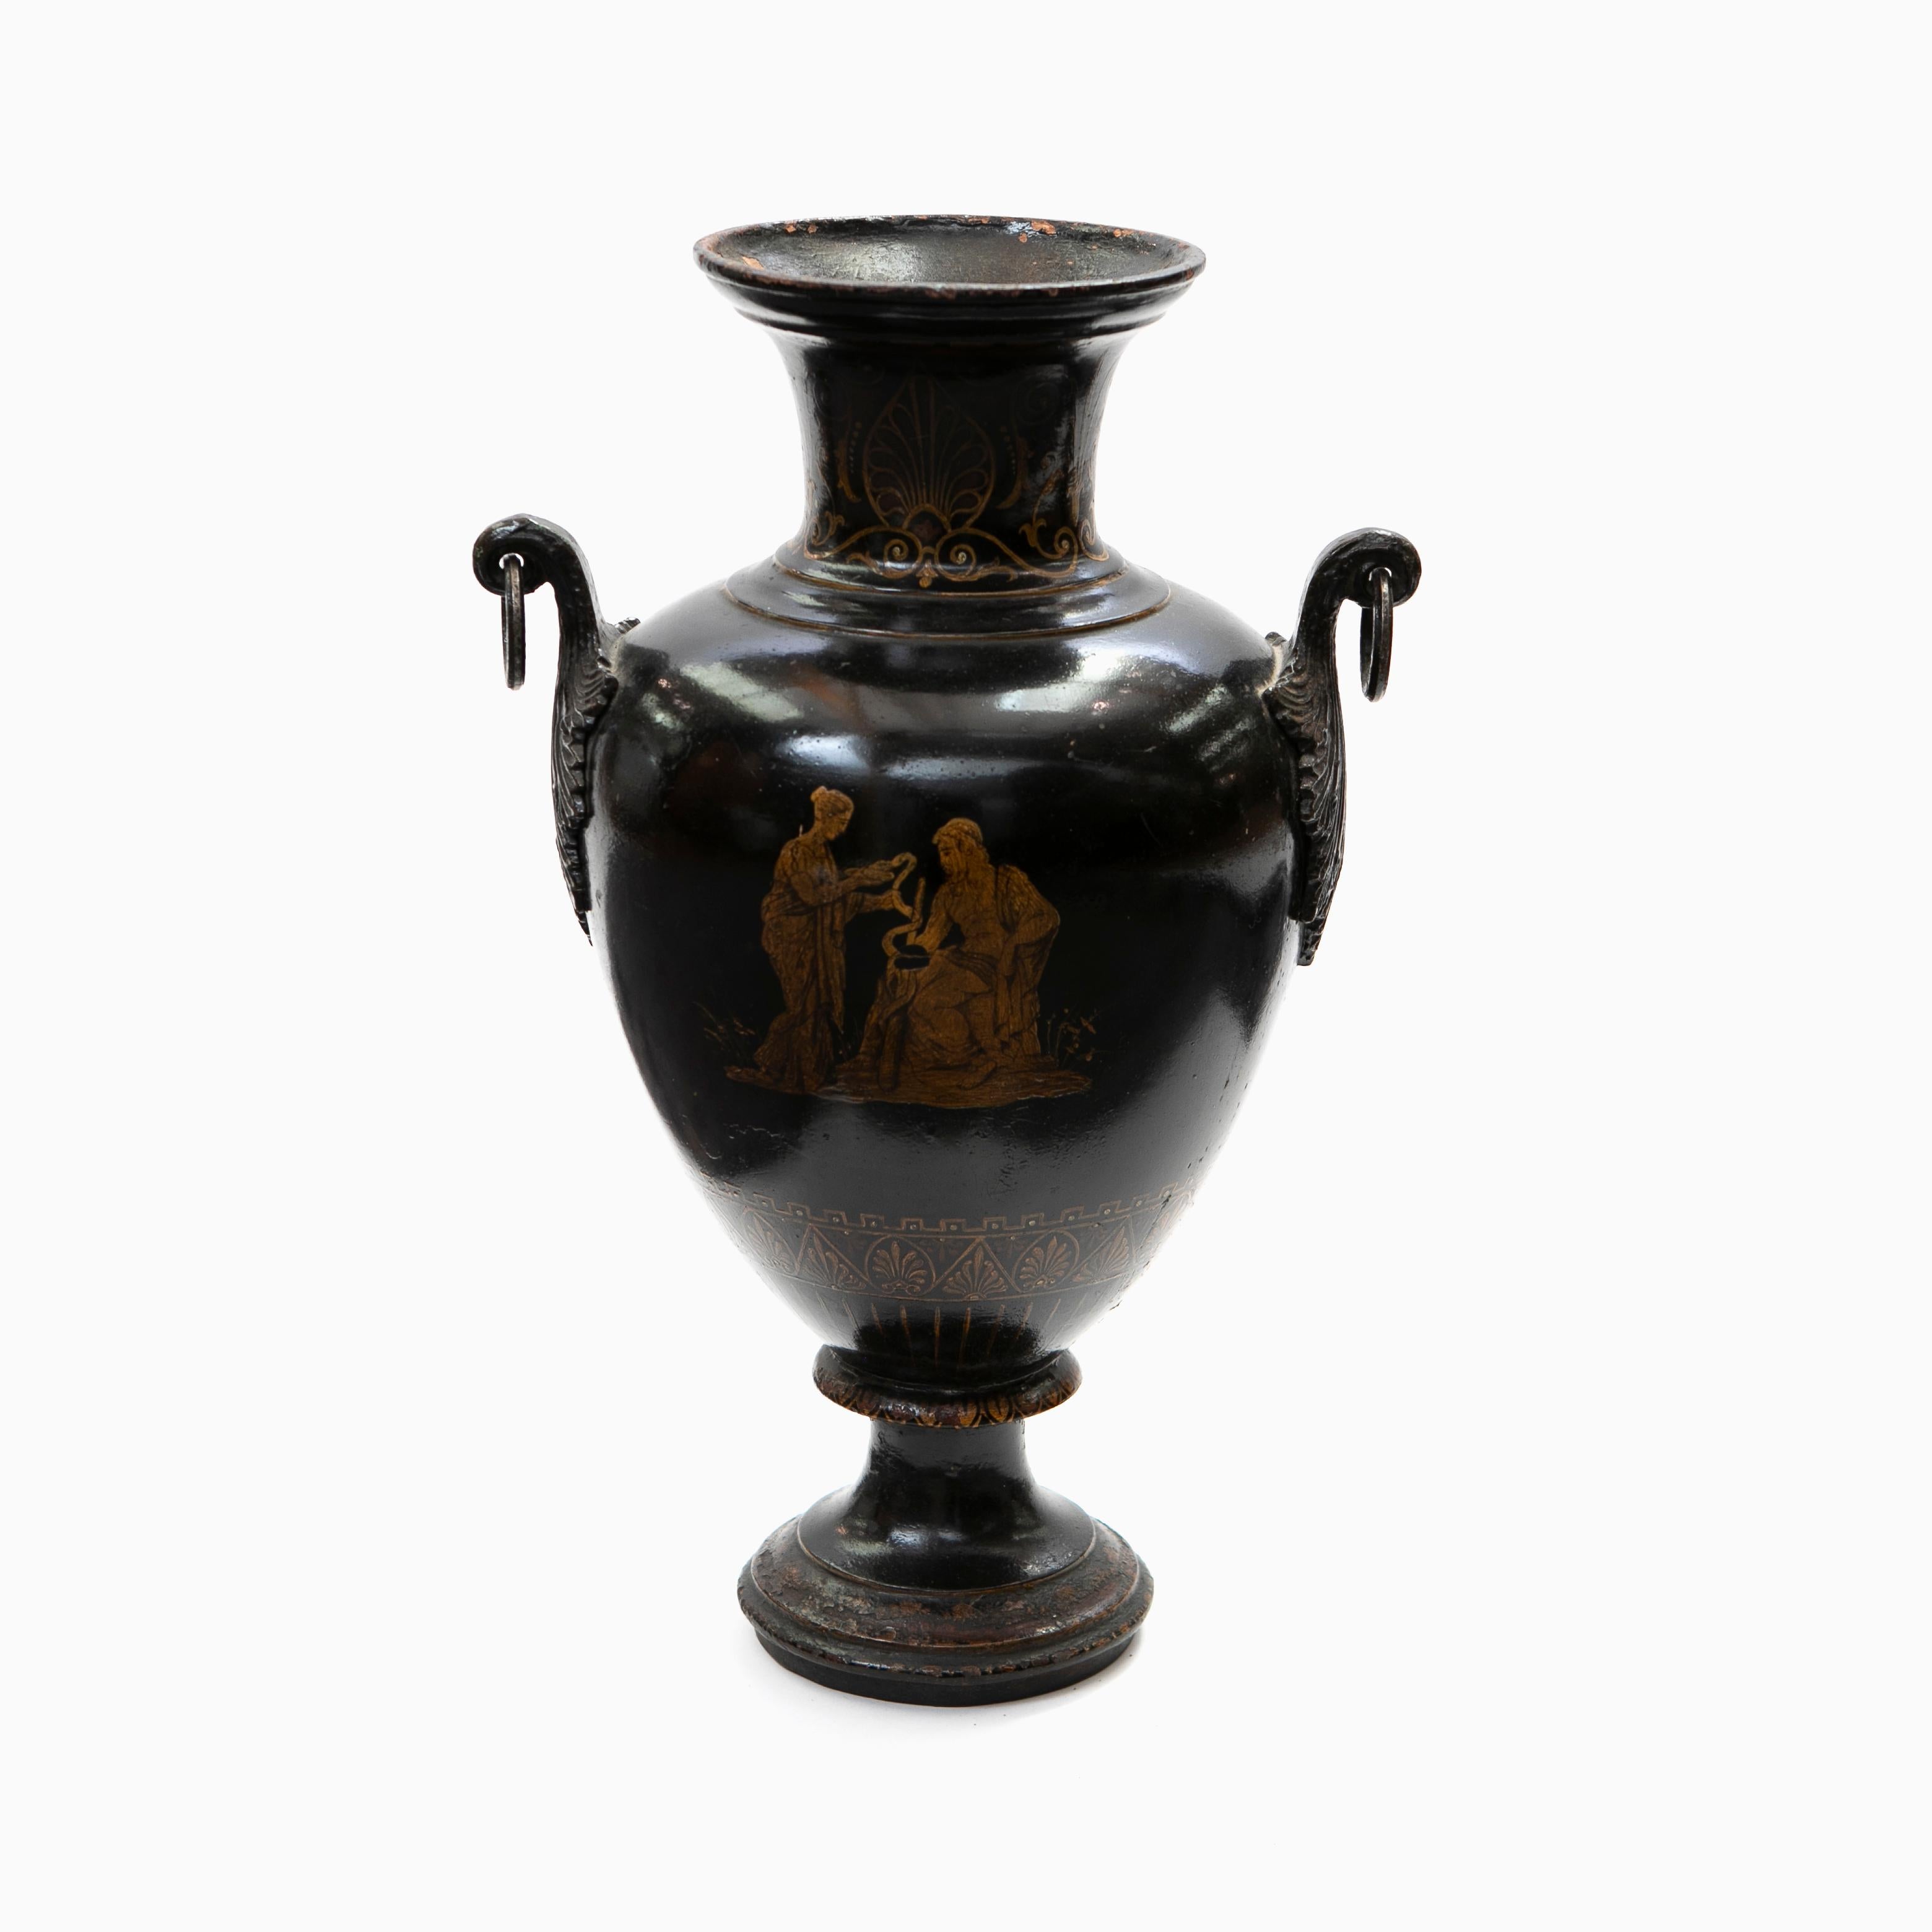 Decorative Amphora with handles in the style after the Greek classical period.
The vase is done in black painted cast iron with yellow decorations, one side depicts a classical Greek scene with couple.
Original condition.

Denmark, circa 1840.